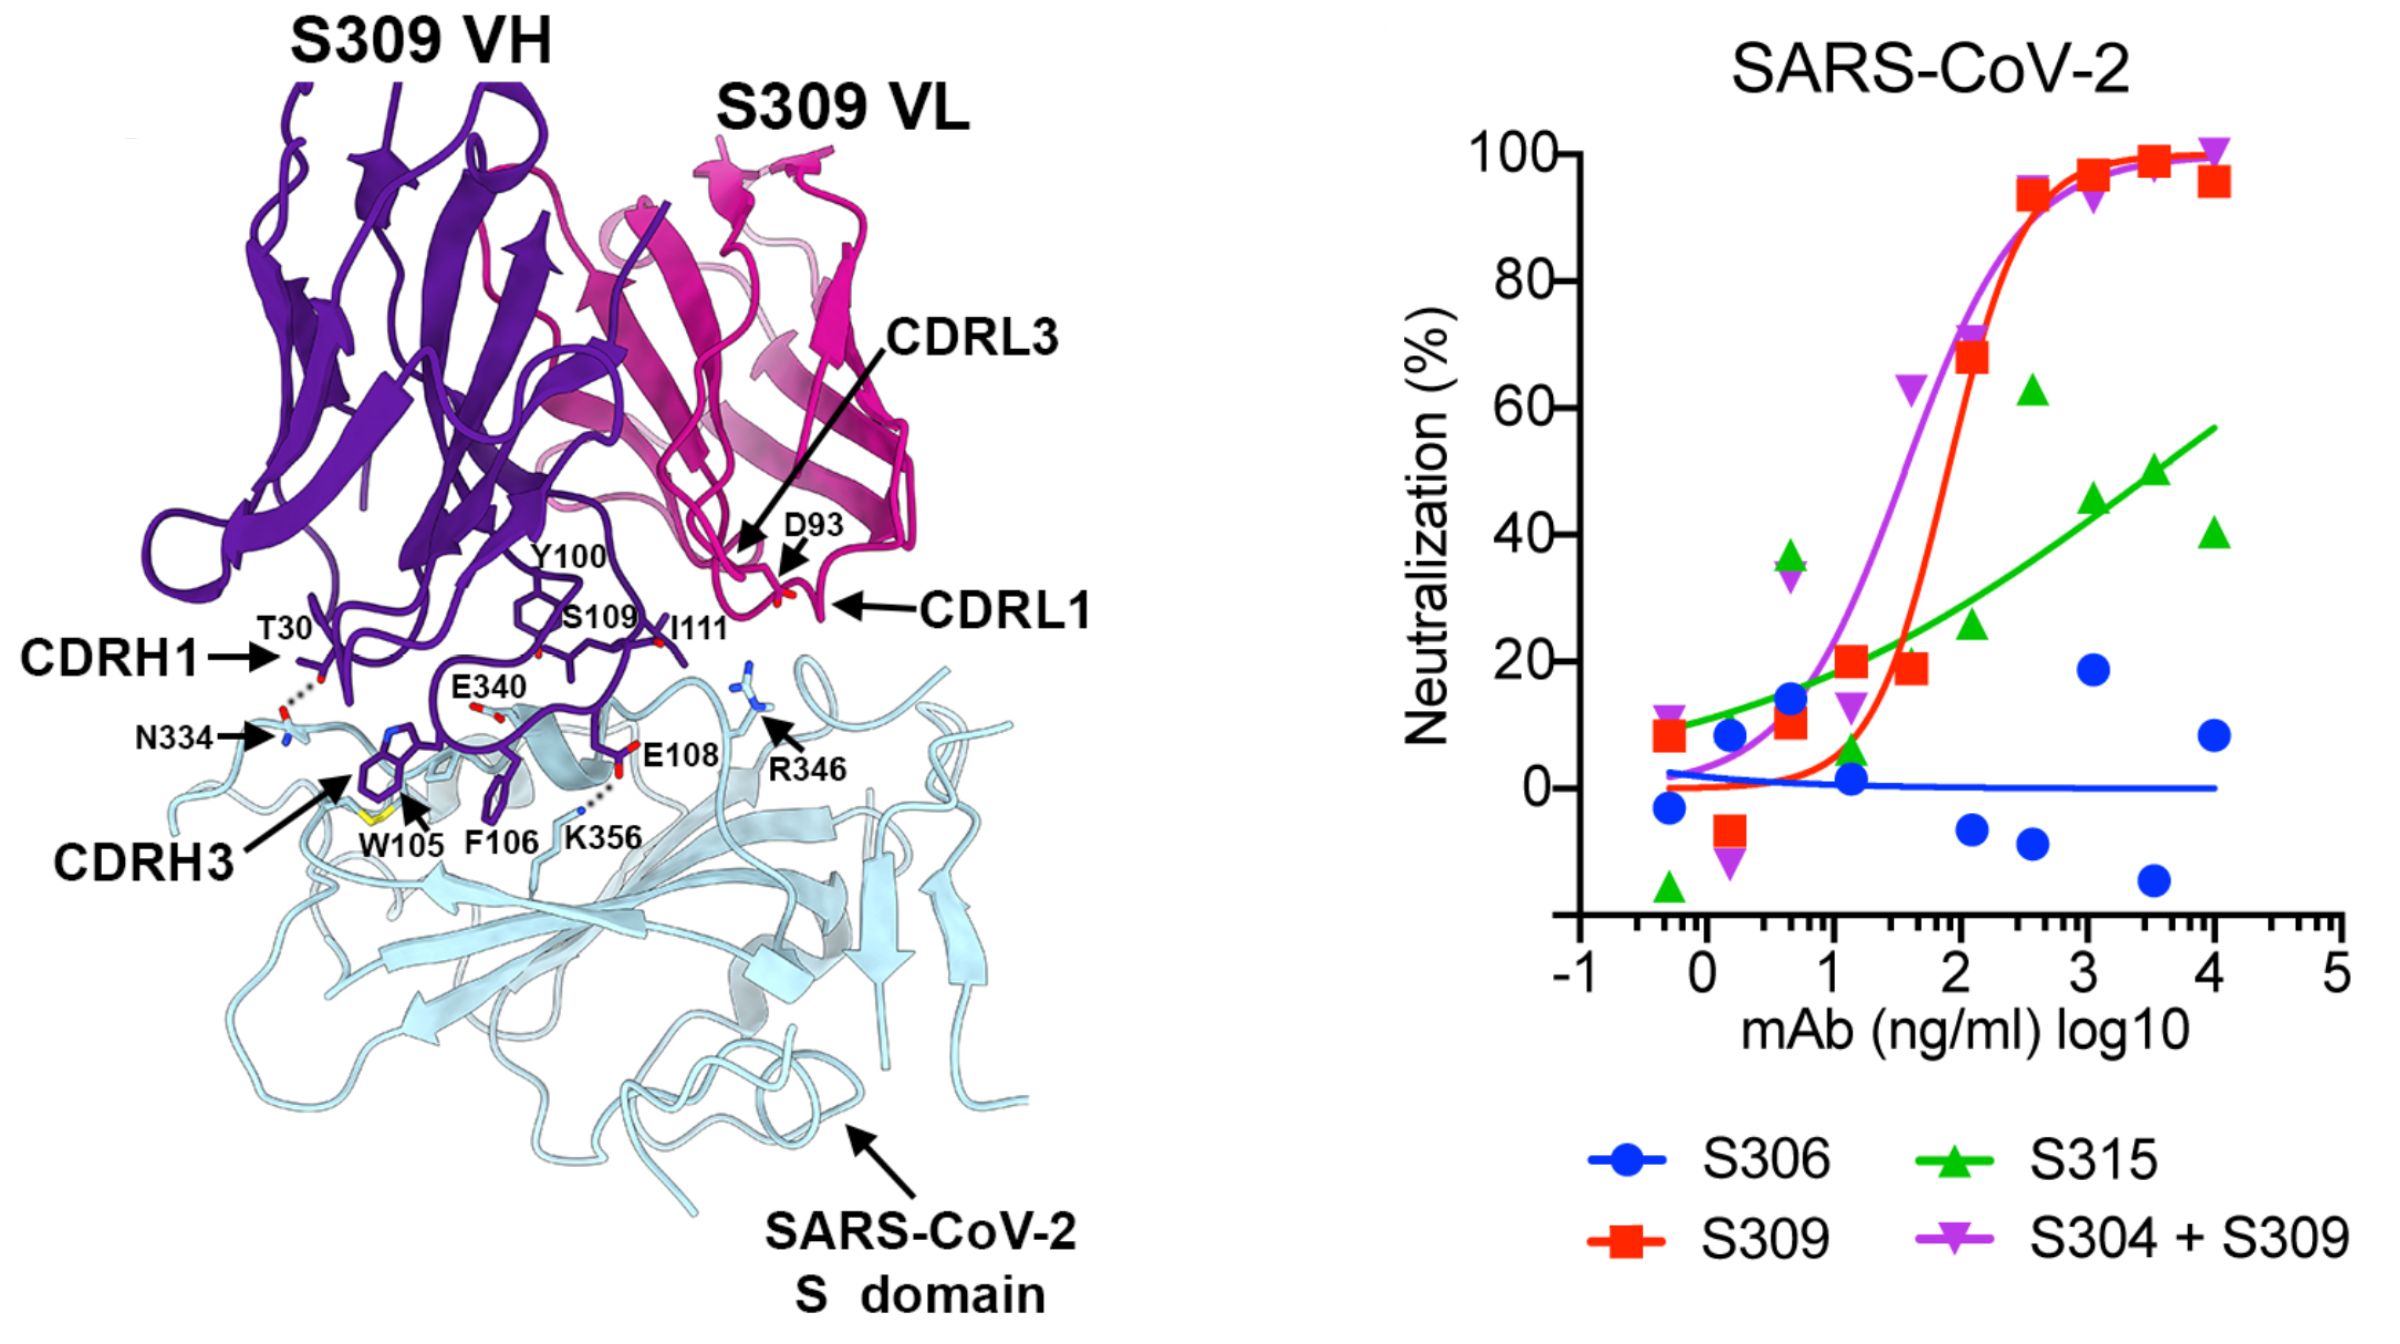 Left: Ribbon diagram of S309/CDR interface. Right: Graph showing neutralization vs antibody concentration for several types of antibodies. Two curves (S309 and S309 cocktail) quickly reach 100% neutralization.